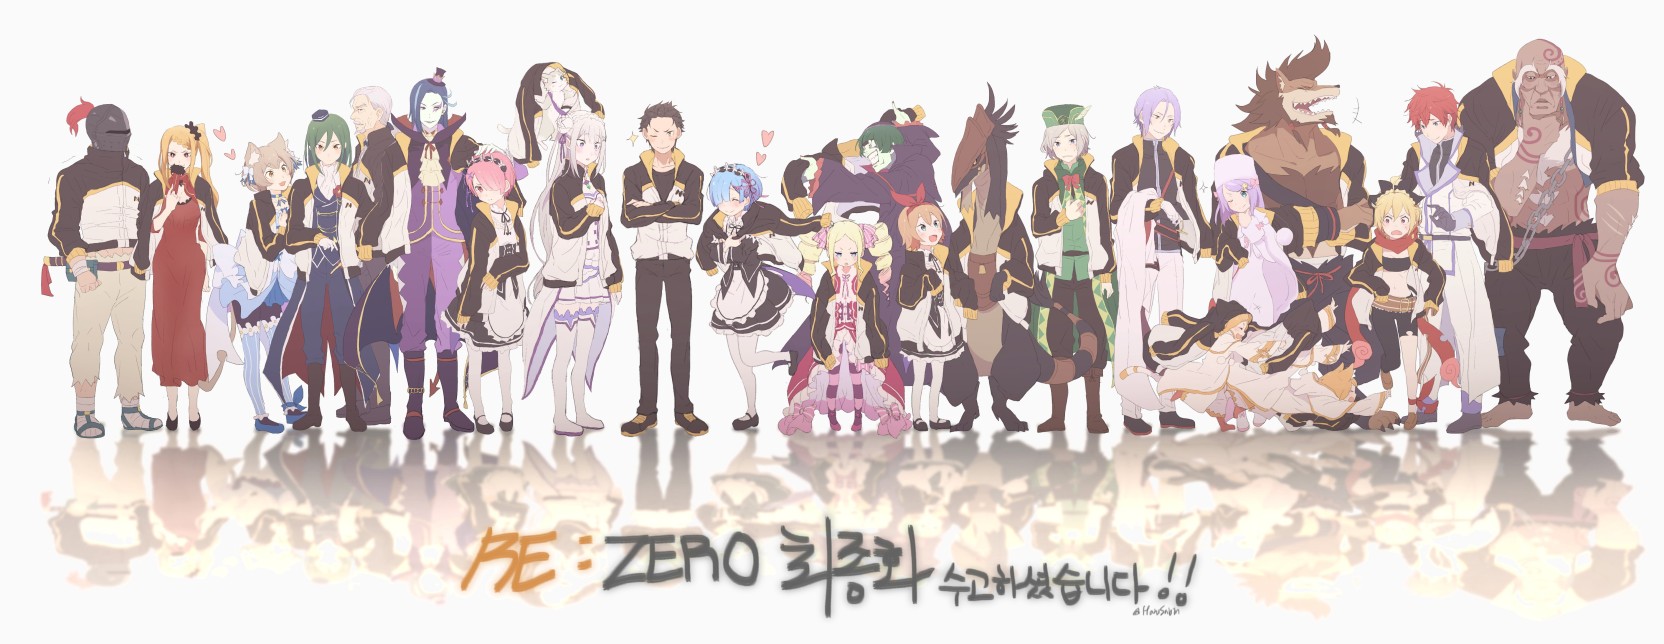 On Offer - Re Zero All Characters , HD Wallpaper & Backgrounds